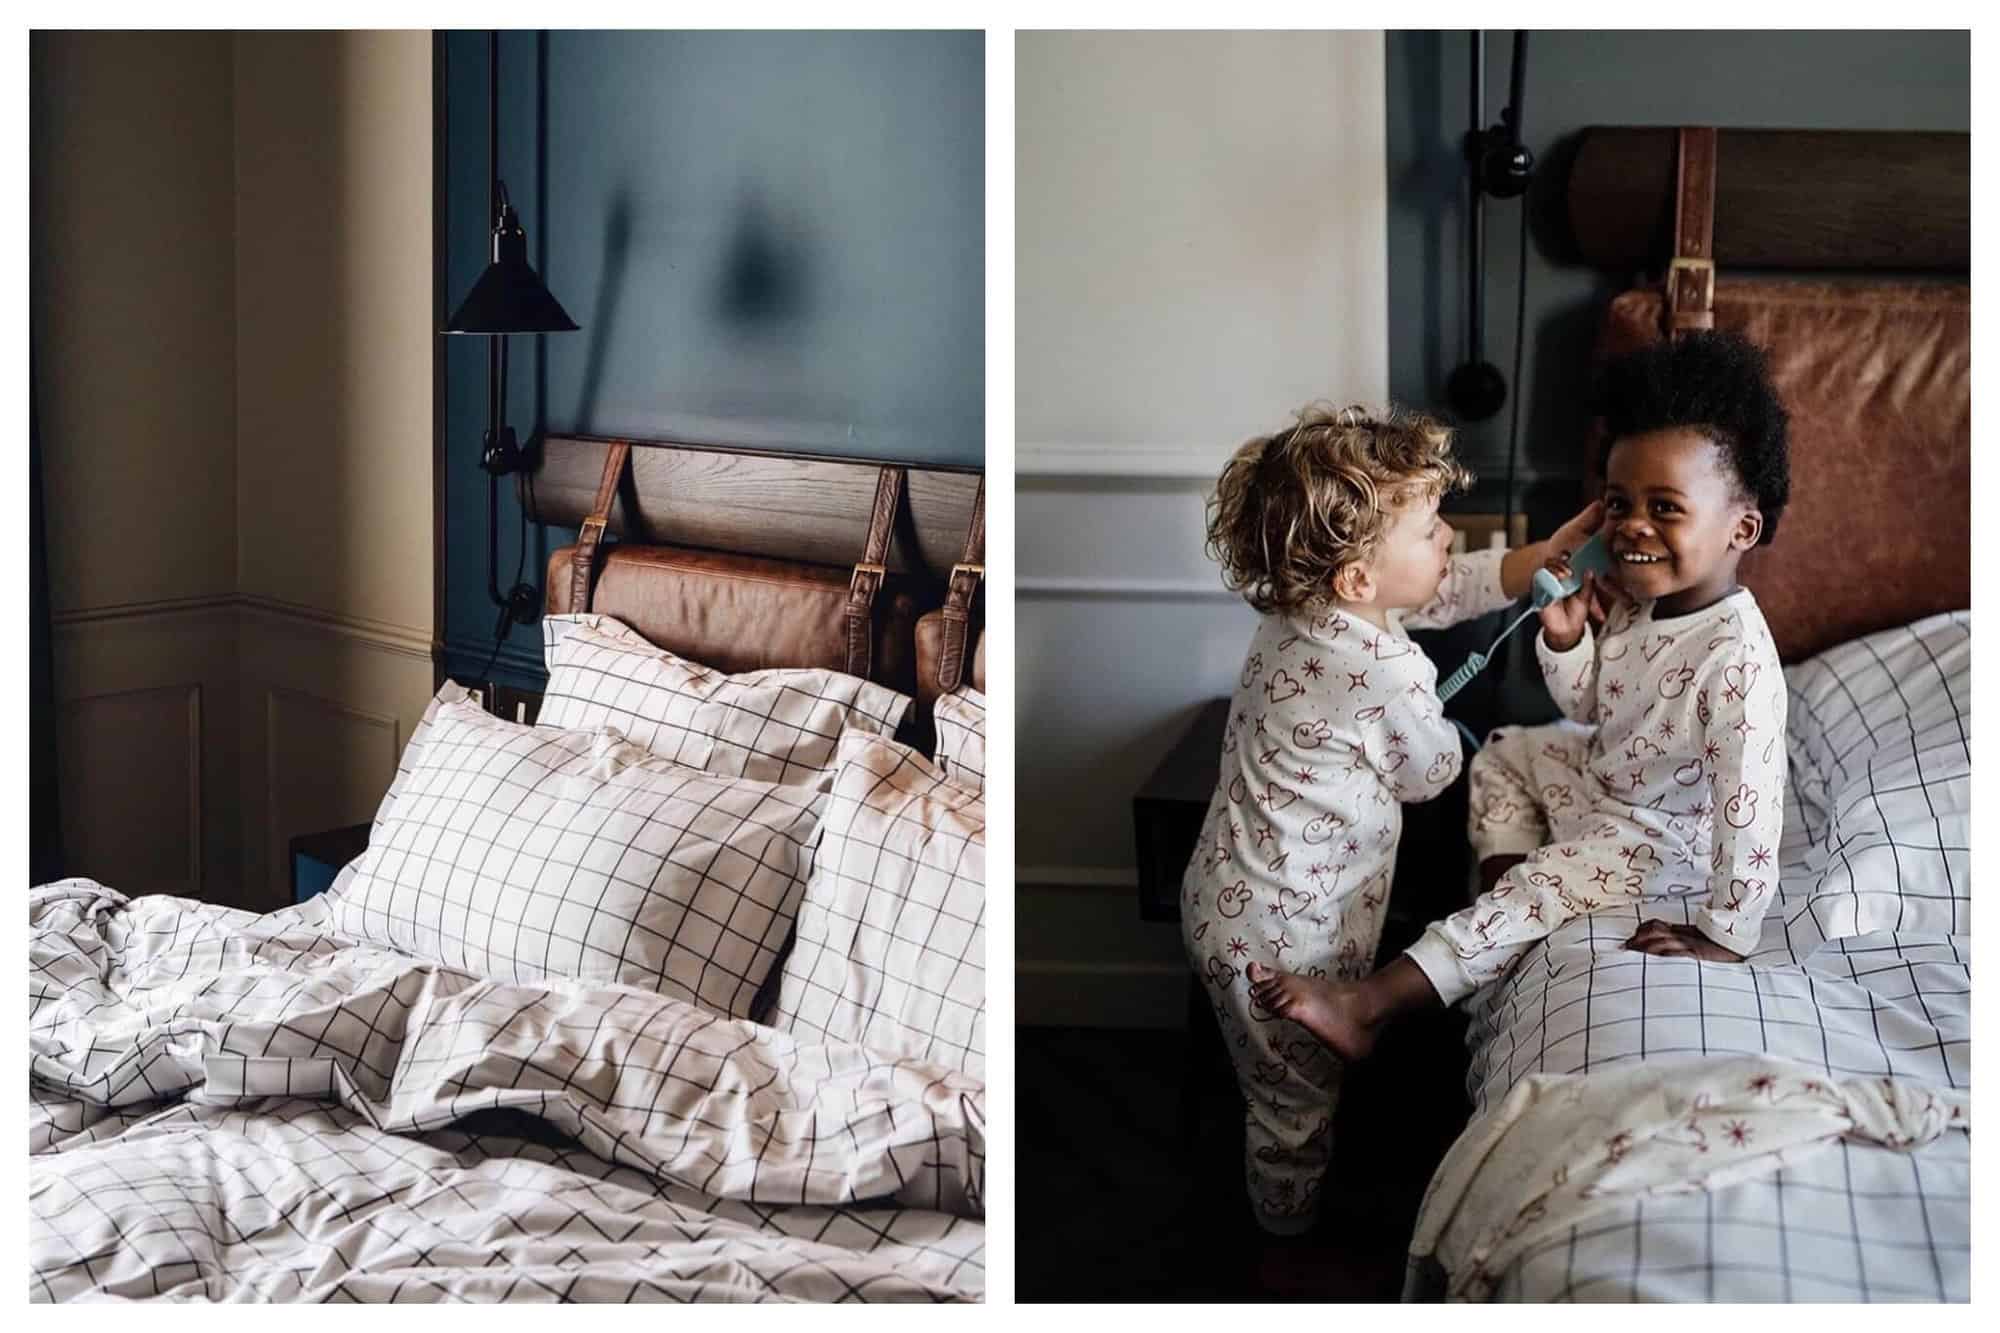 Left- A bed in front of a blue wll in a hotel room. 
Right- Two young boys in pajamas talk on the phone in a hotel room. 
